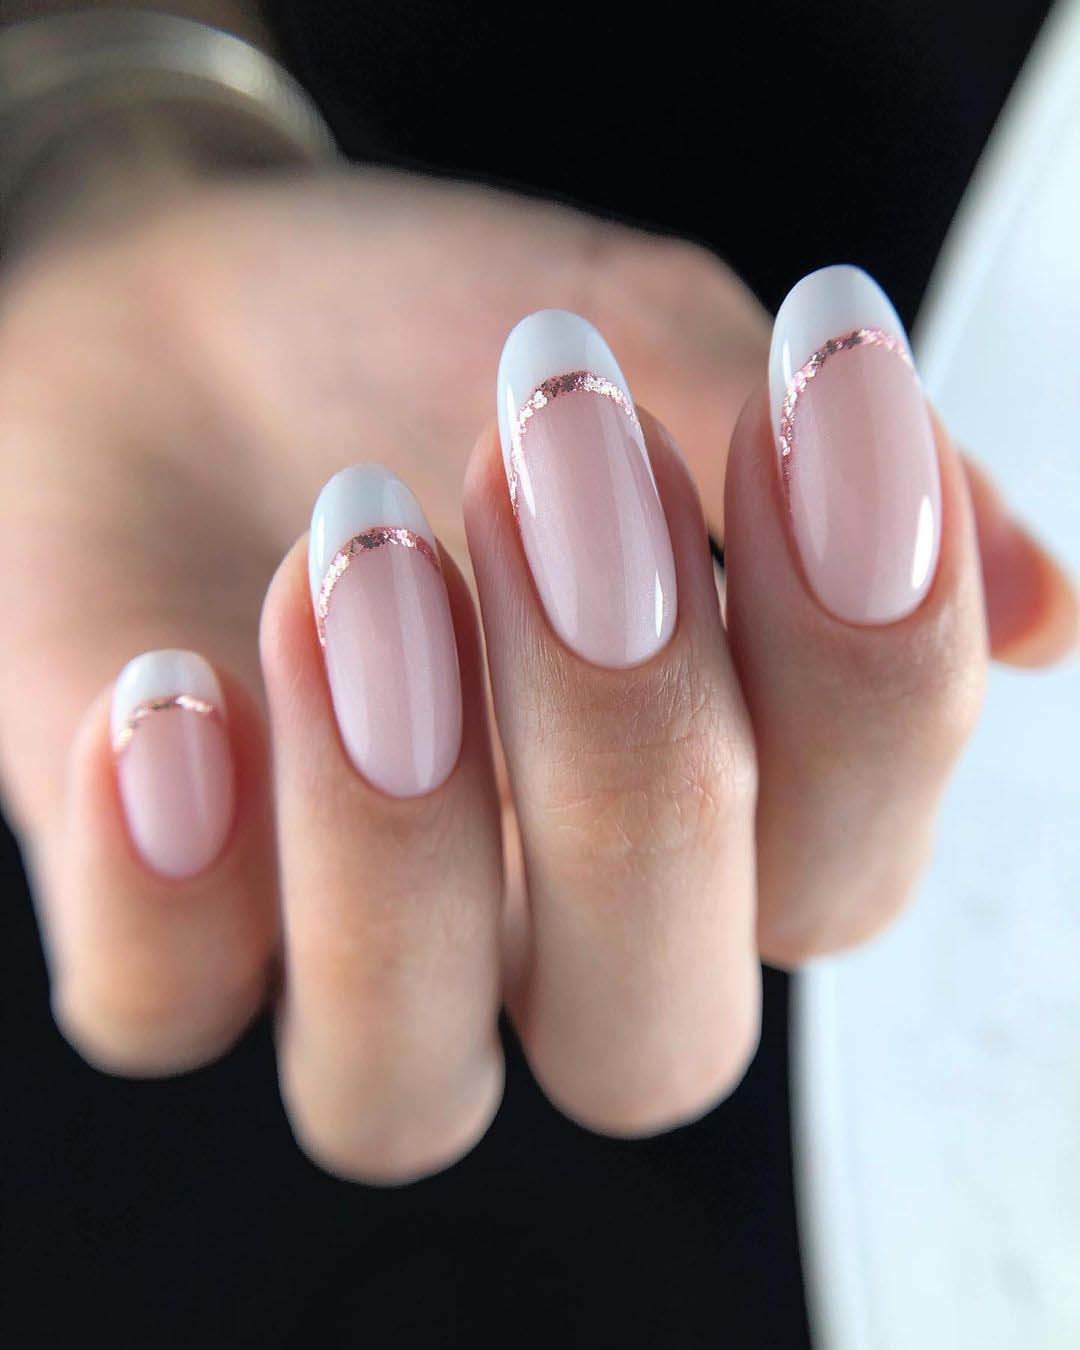 pinterest nails wedding white pink french with glitter mariapro.nails